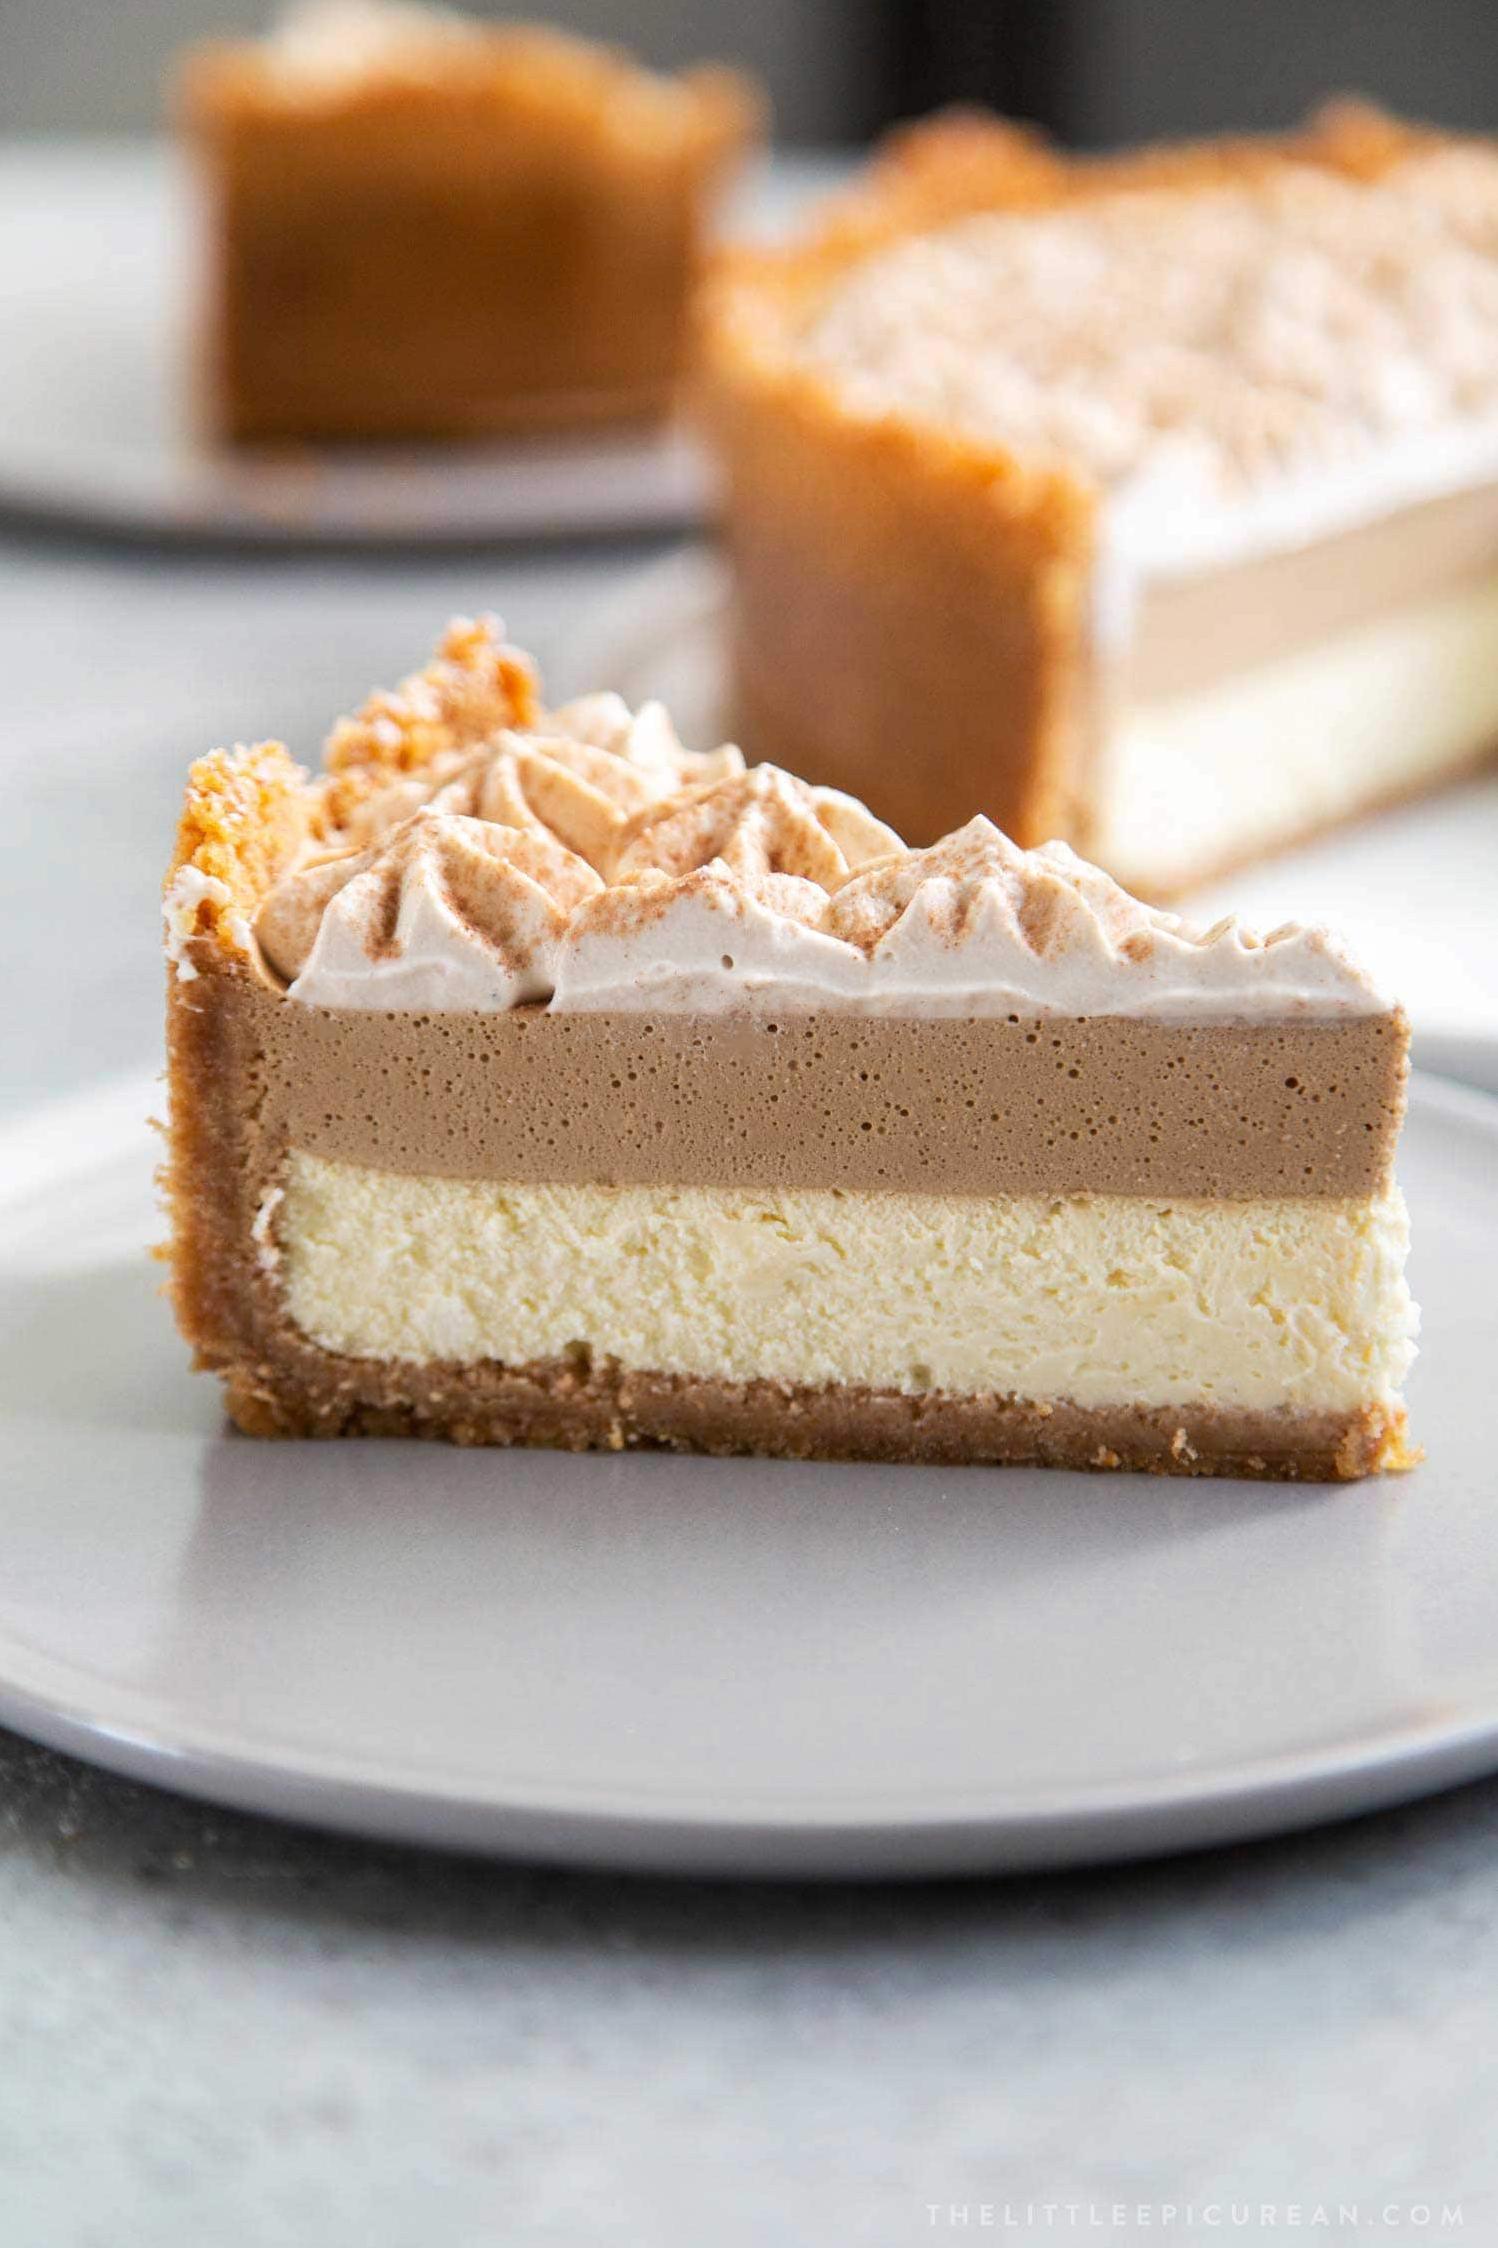  Wake up your taste buds with this brandied coffee cheesecake!